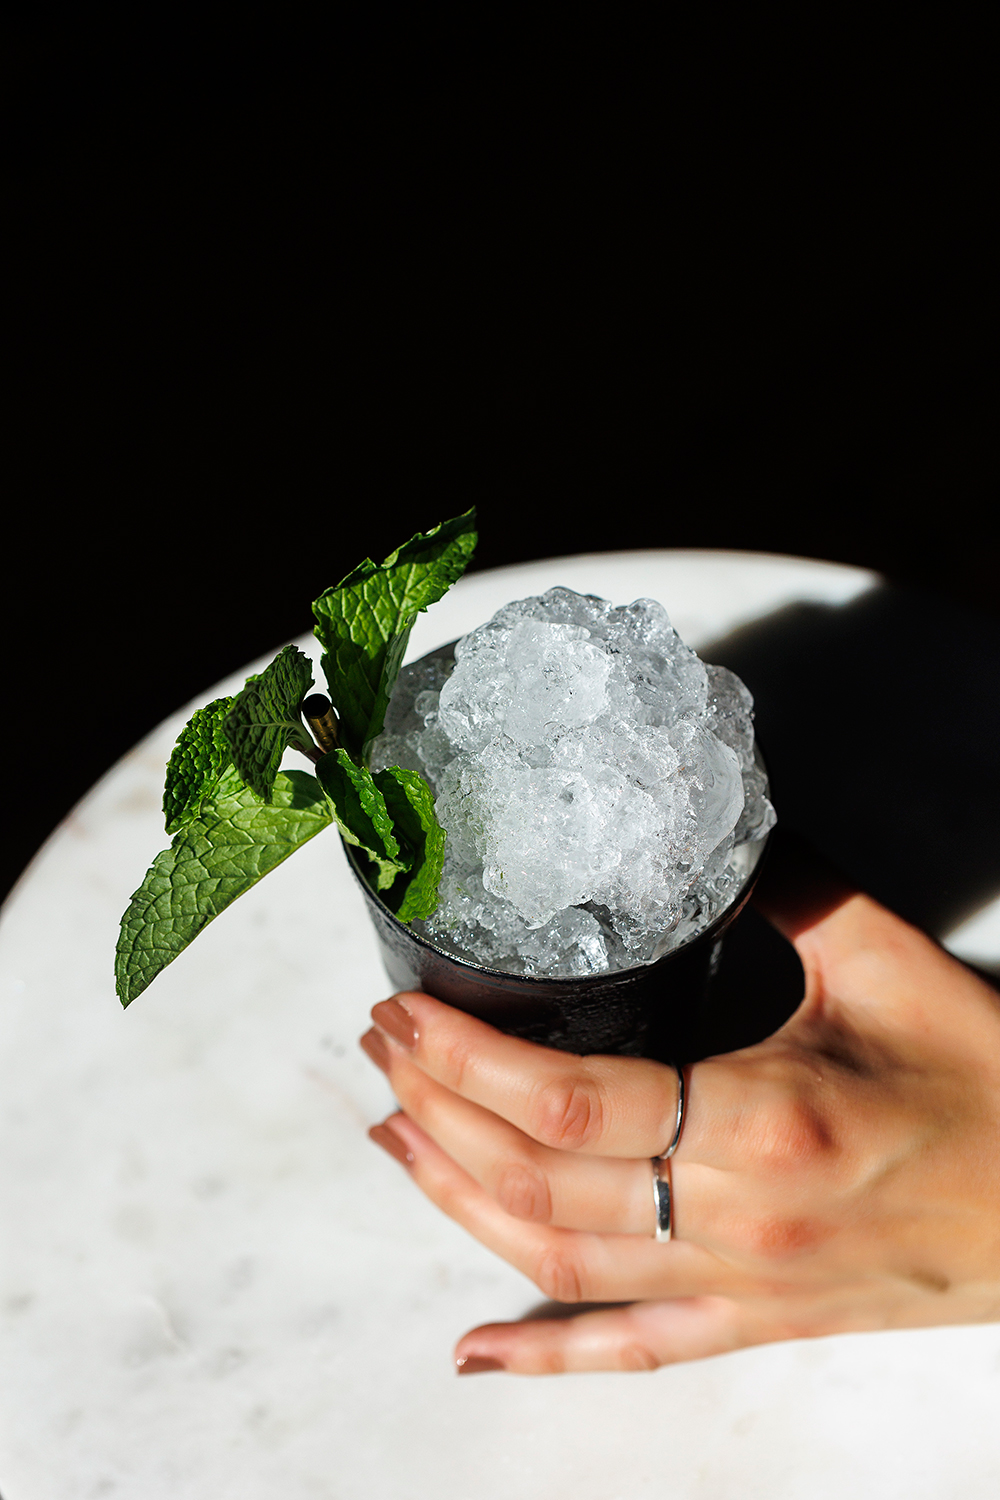 Classic cocktails, like the julep, are found on The Merchant’s menu